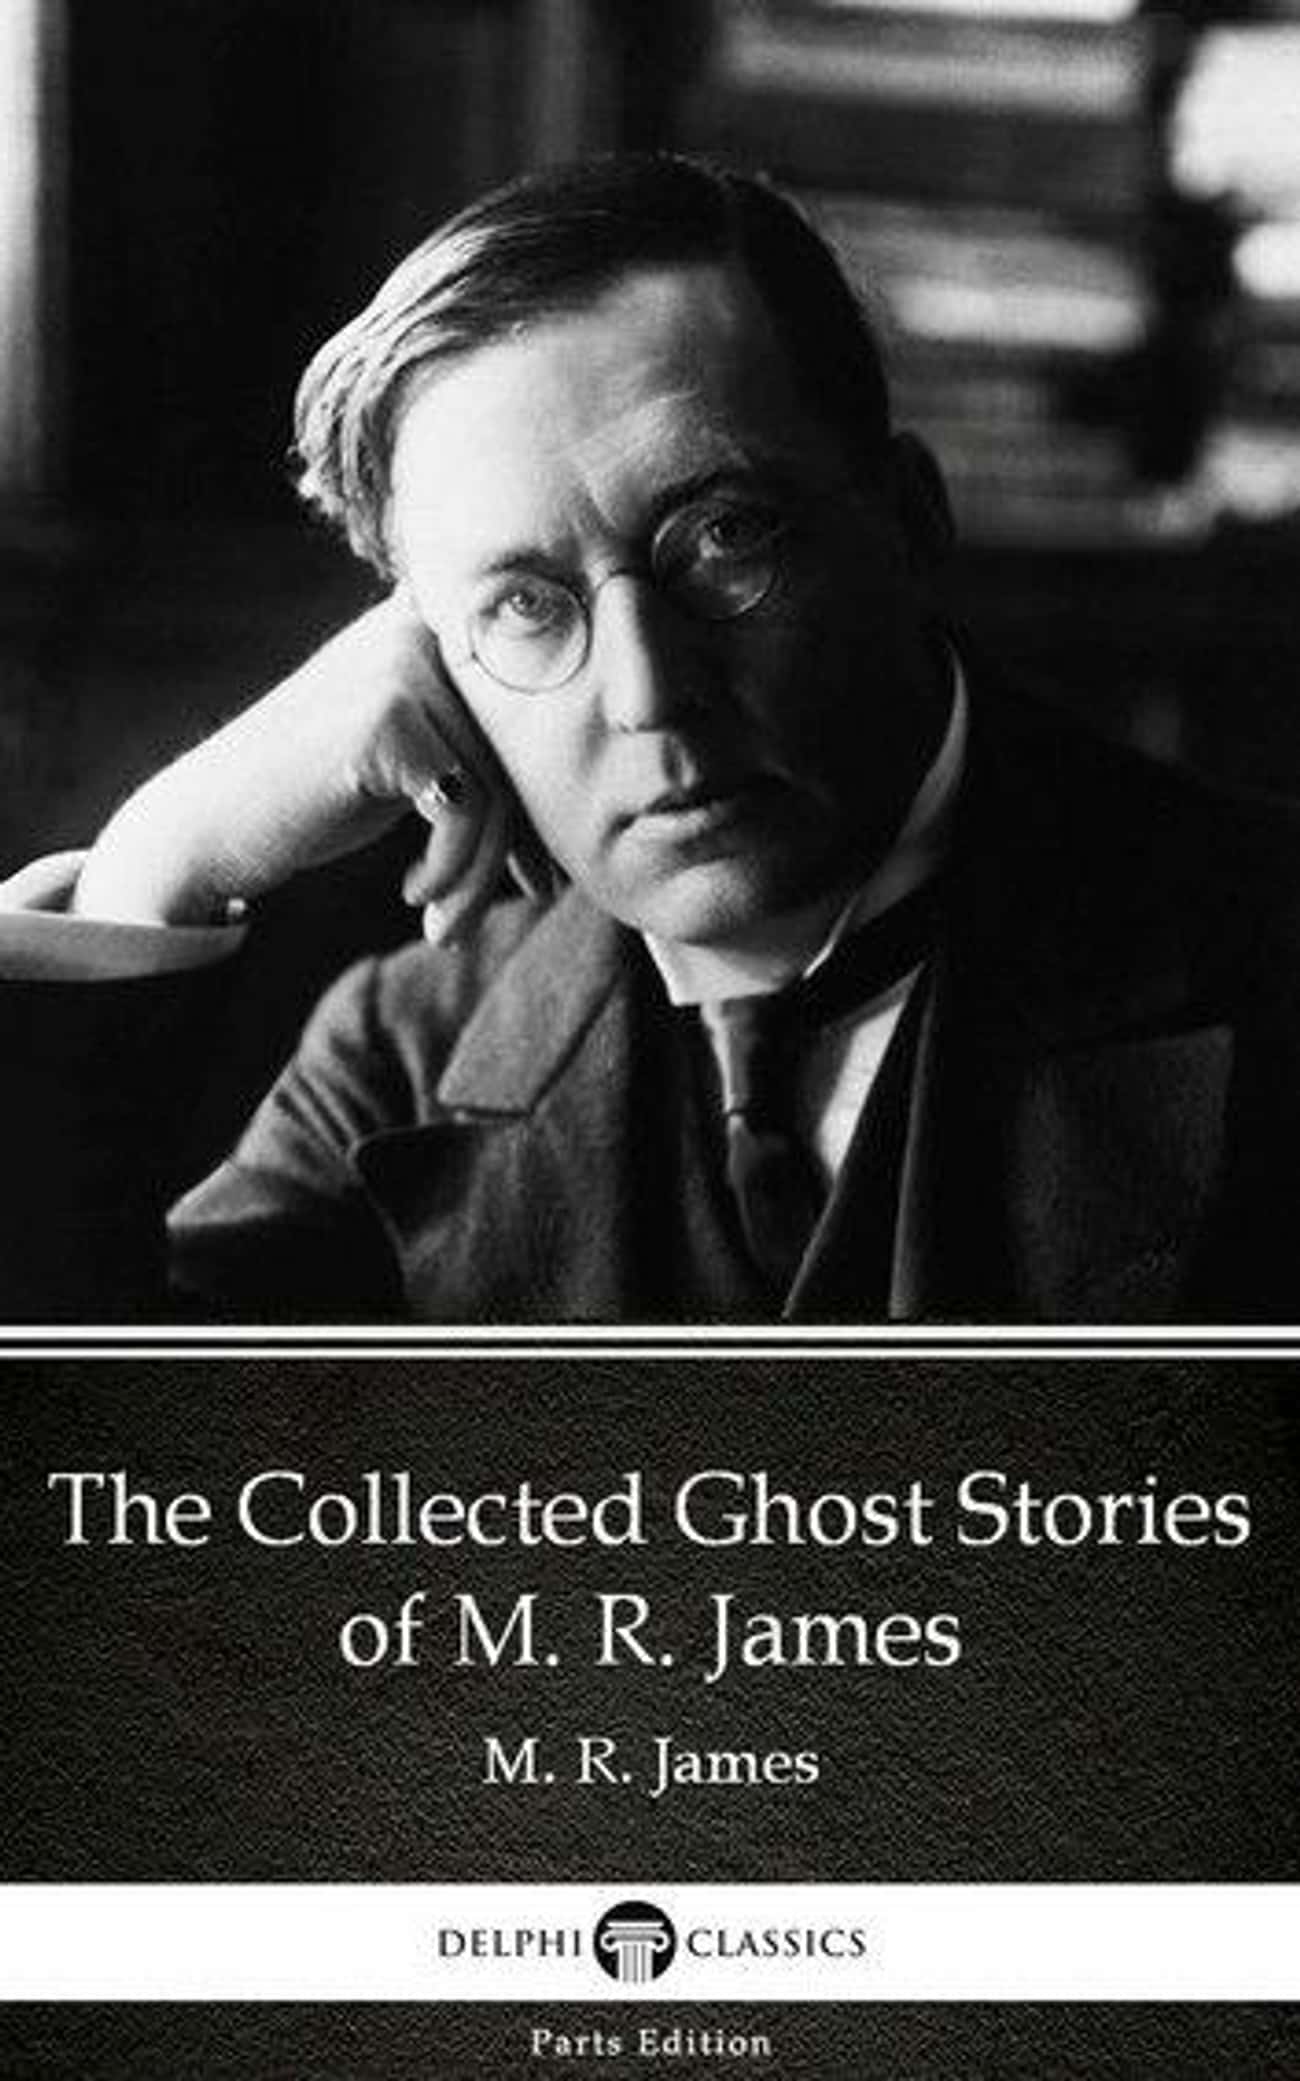 M.R. James Wrote An Early 20th-Century Version Of The Tale